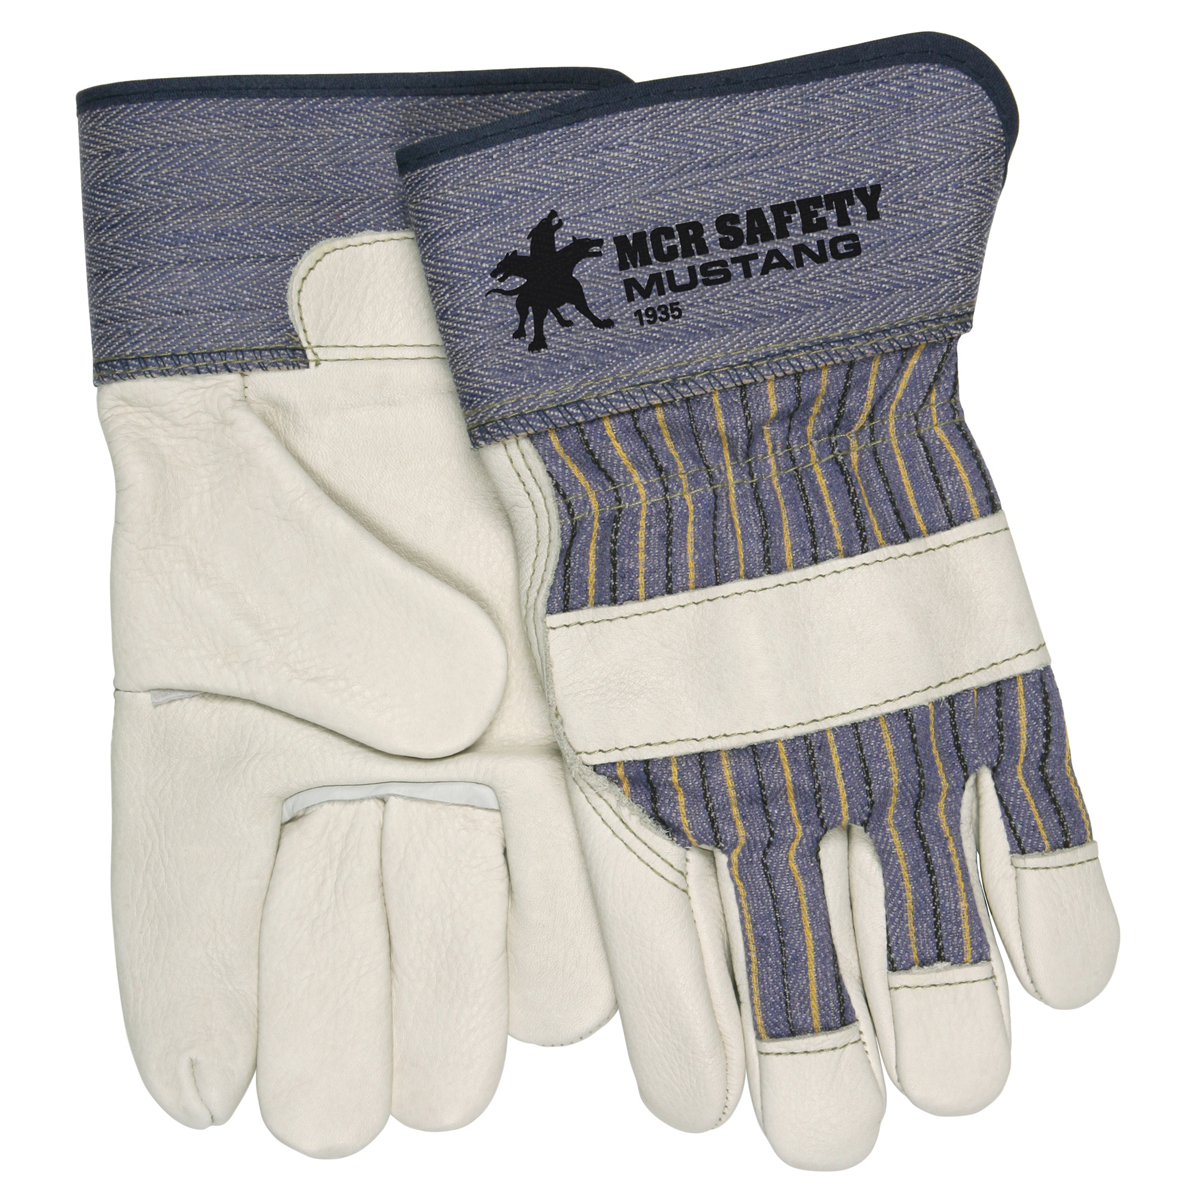 MCR Safety X-Large Blue, Yellow And Black Premium Grain Cowhide Palm Gloves With Fabric Back And Rubberized Safety Cuff